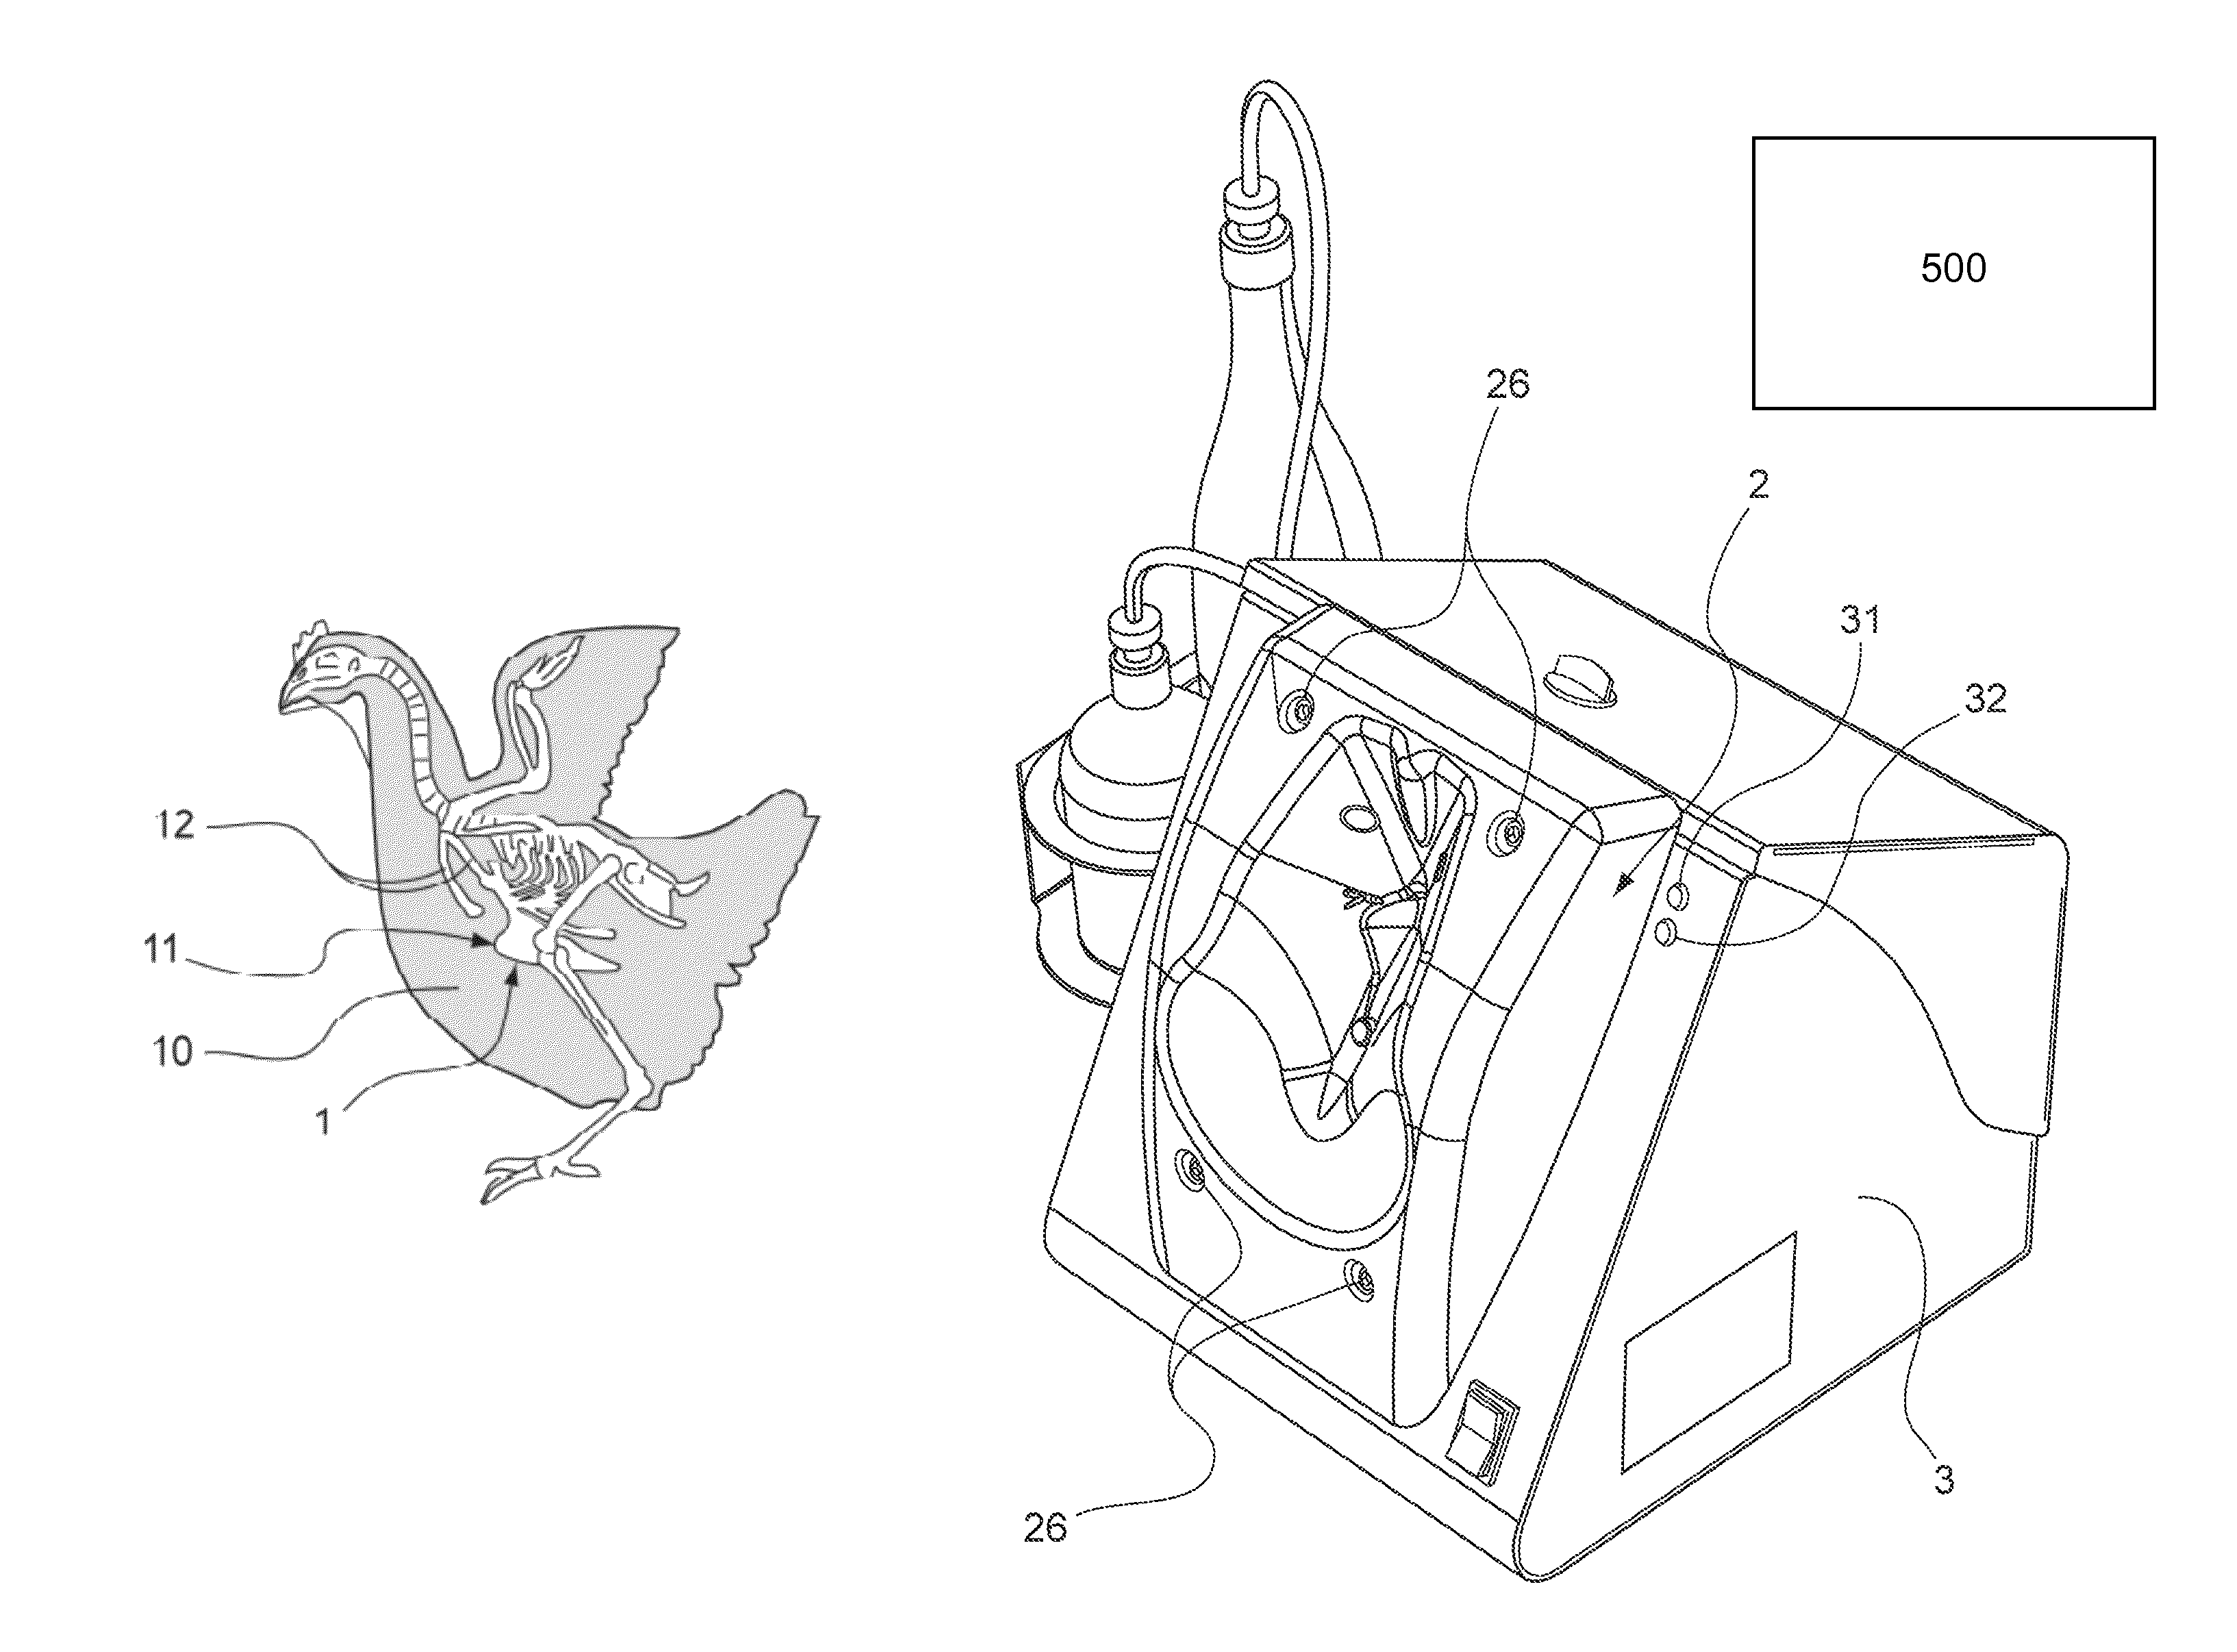 Device for injecting veterinary products to poultry including a retention member having an anatomic form with means for bracing a detectable bone